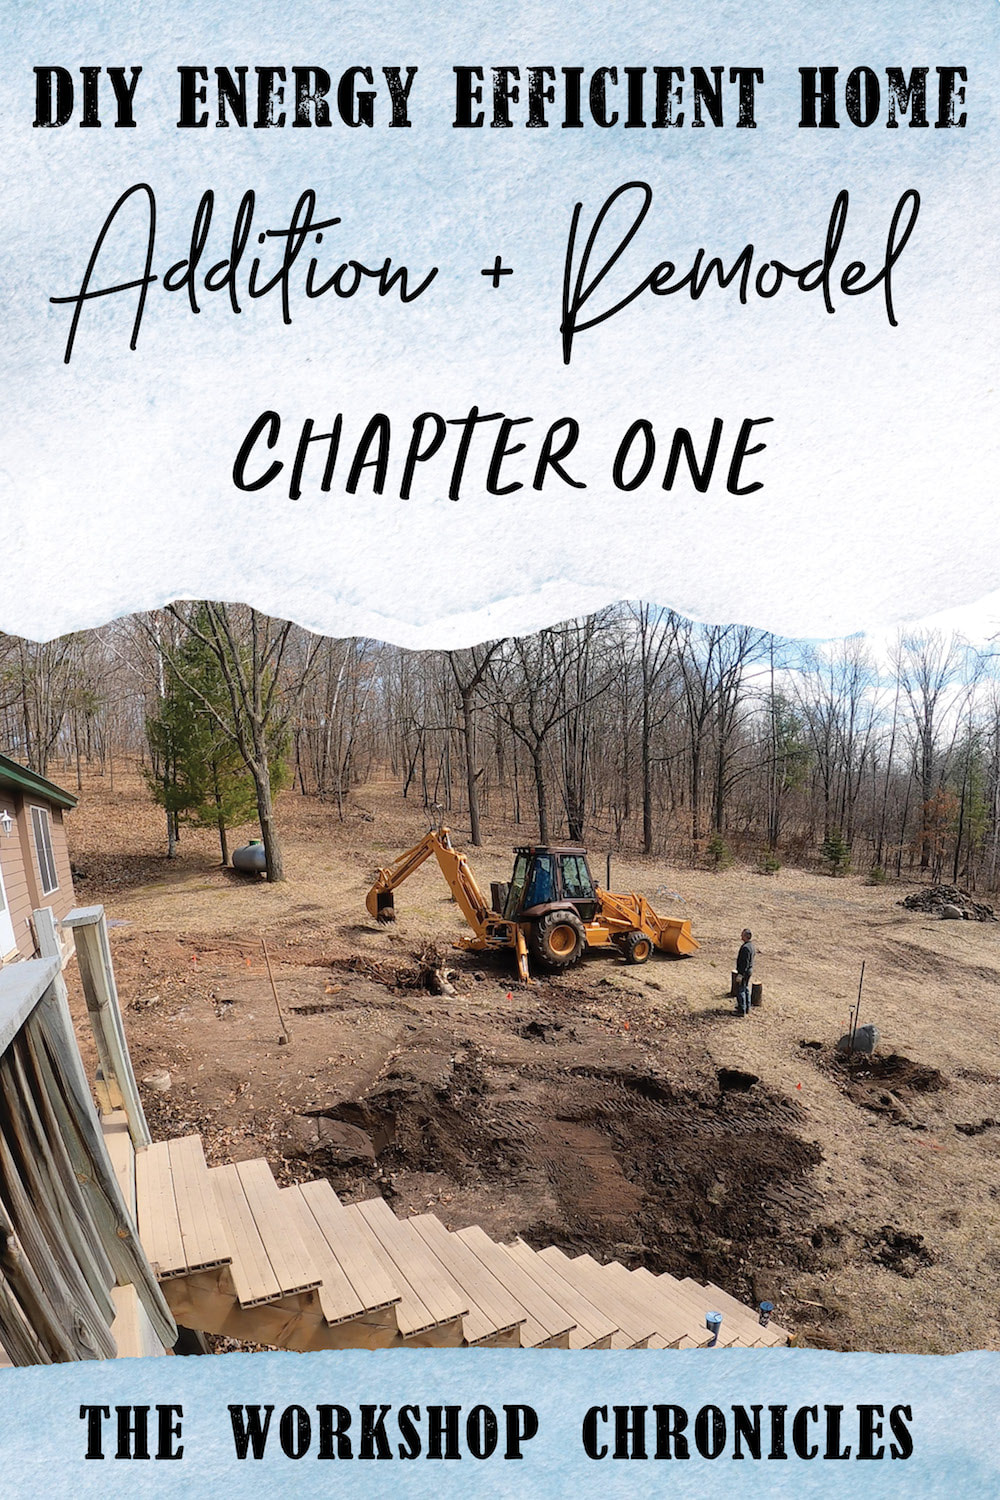 DIY Energy Efficient Home Addition + Remodel Chapter One Video